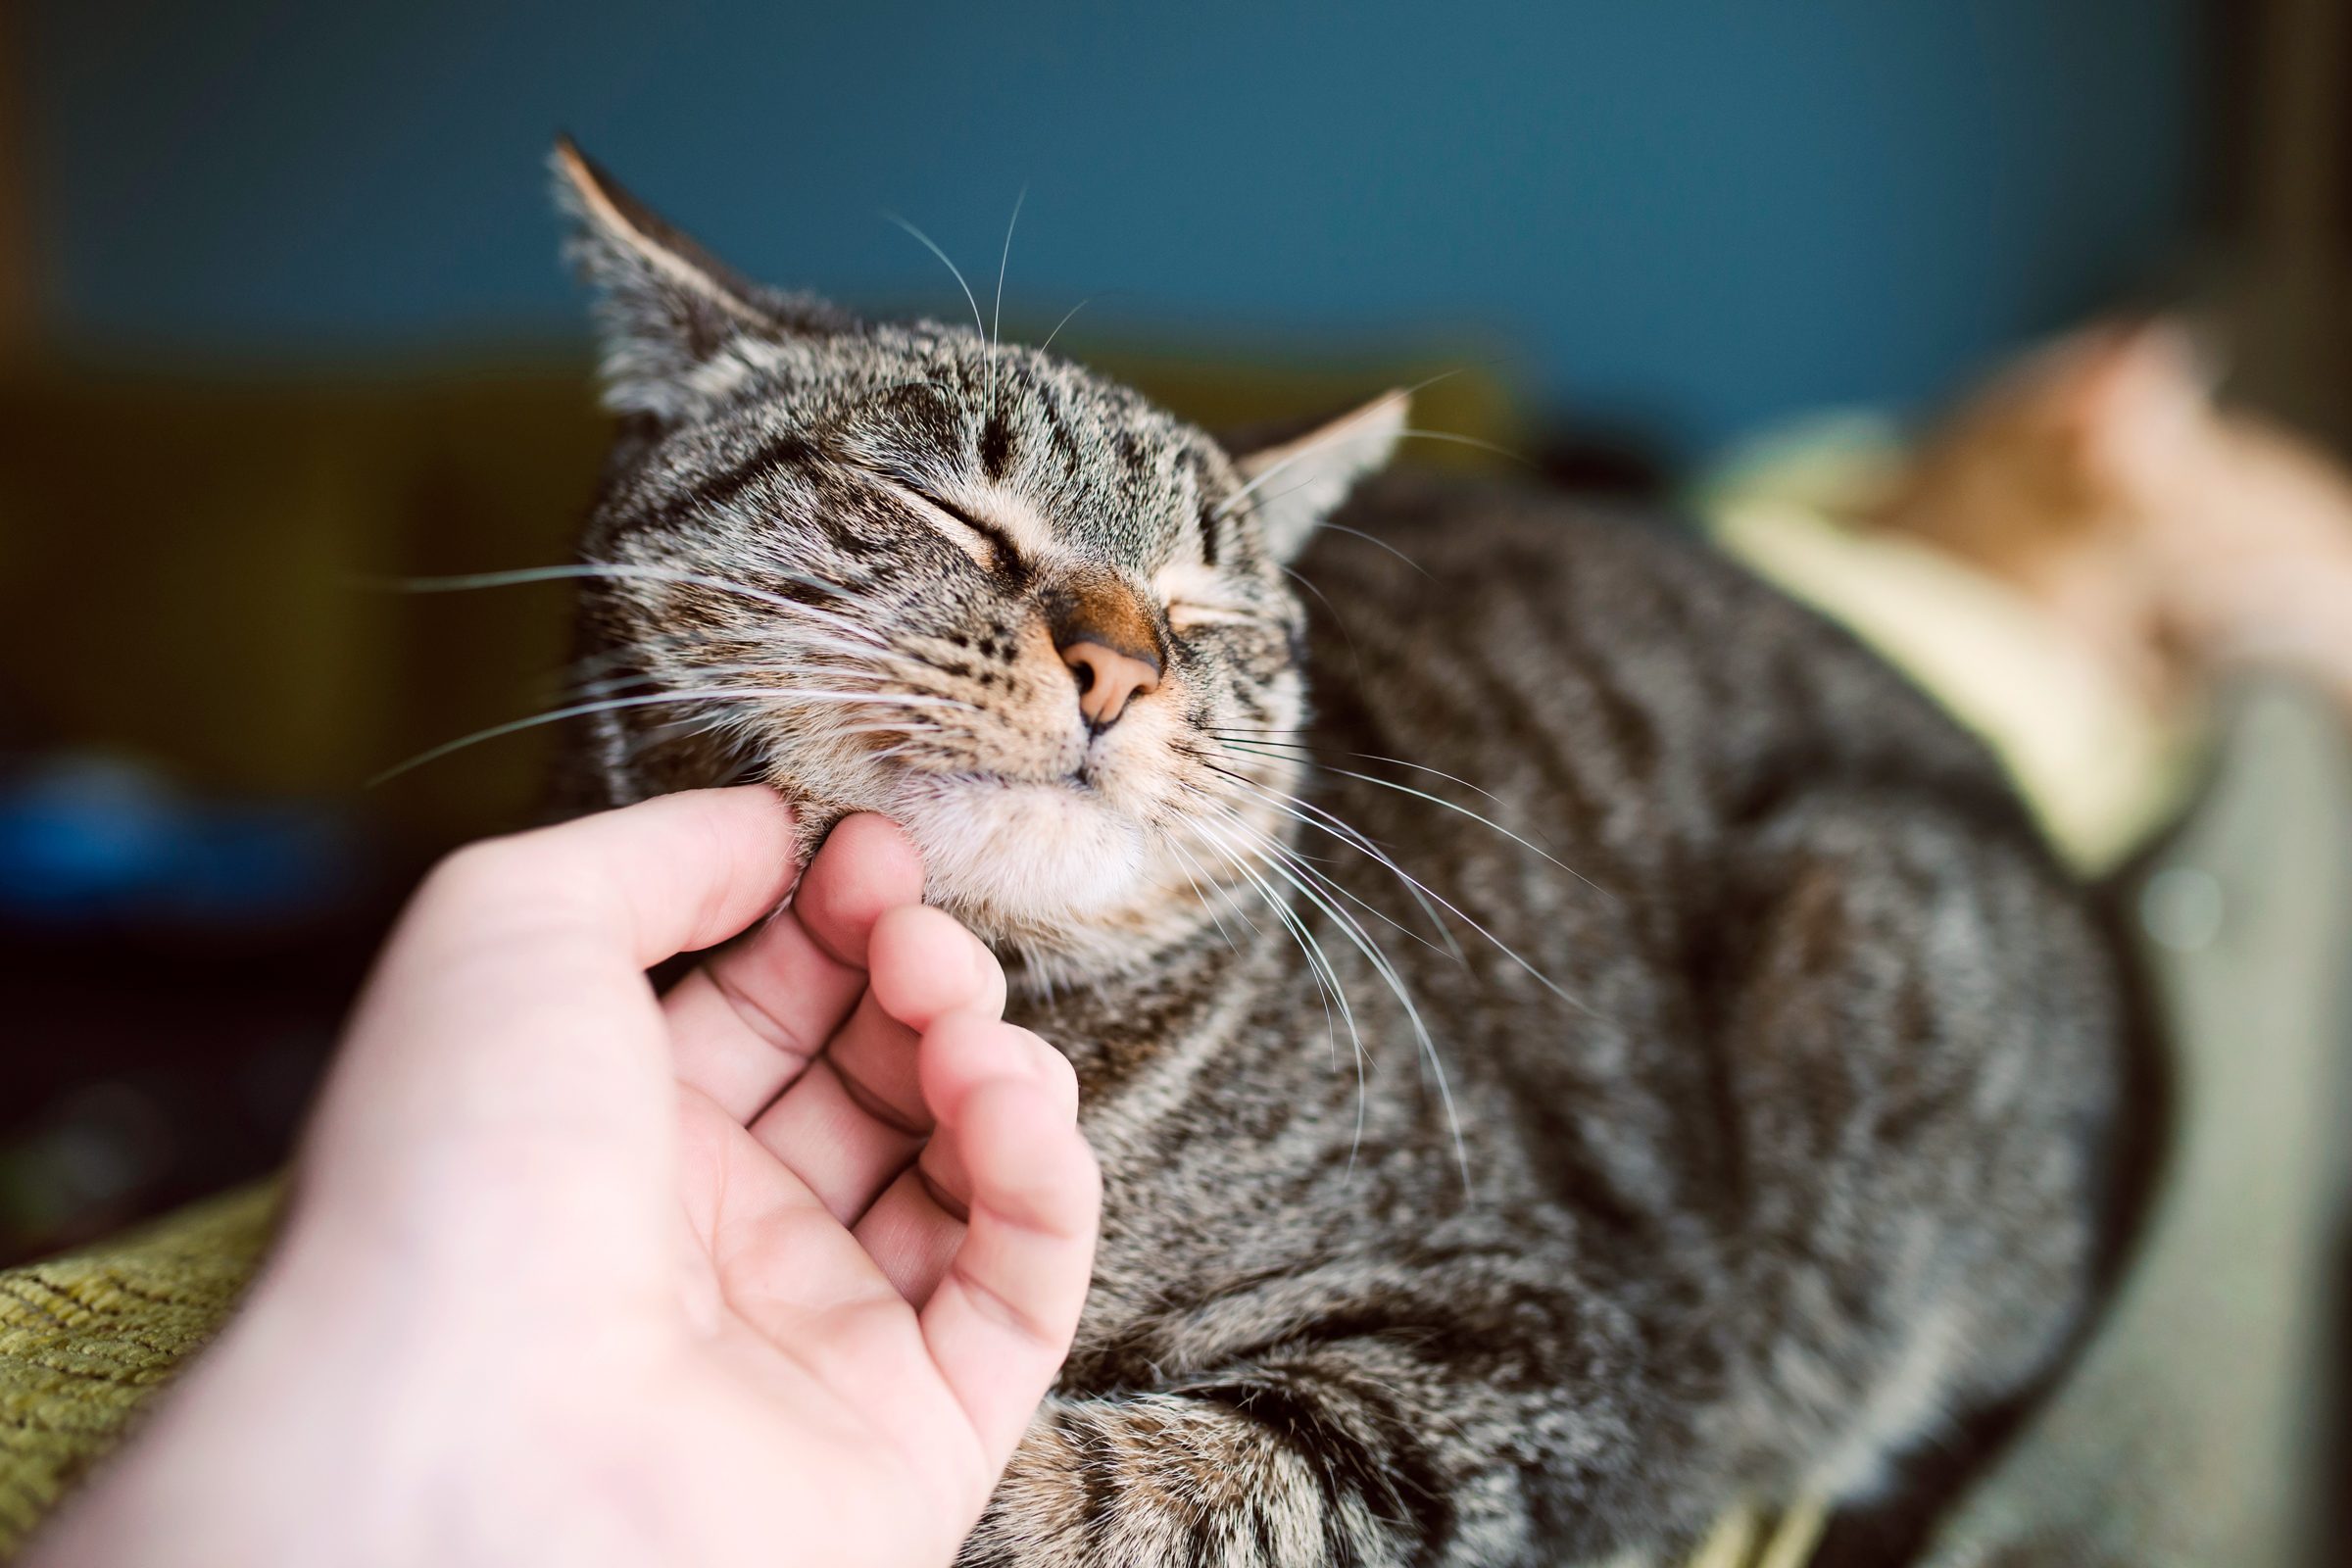 Purrs Versus Roars: The Secret Reason Why Cats Who Purr Can Never